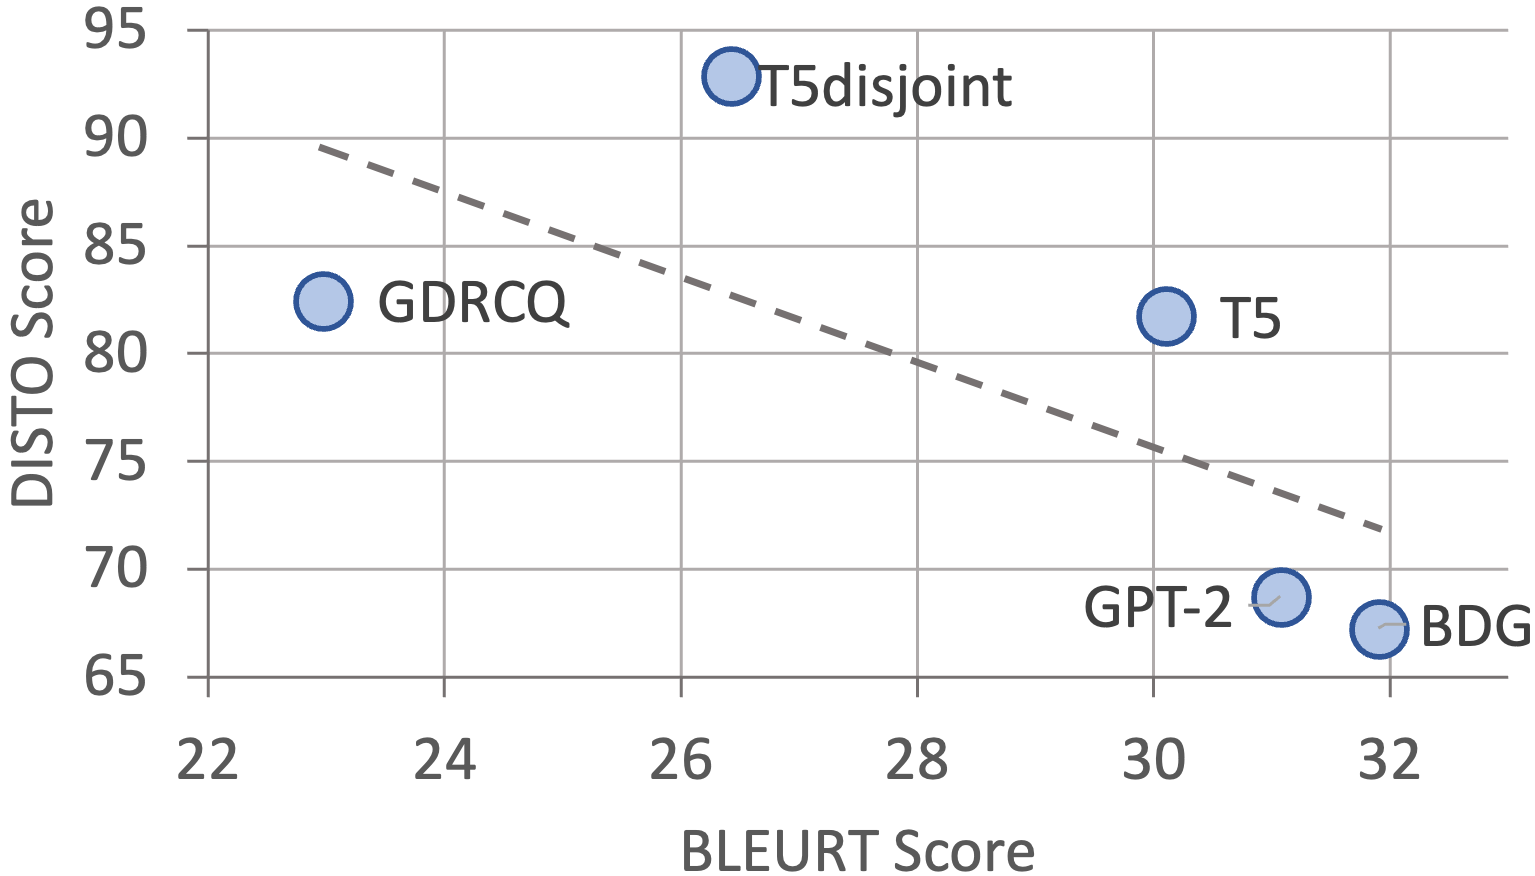 DISTO vs BLEURT for various DG models, with a fit line showing negative correlation (-0.69).